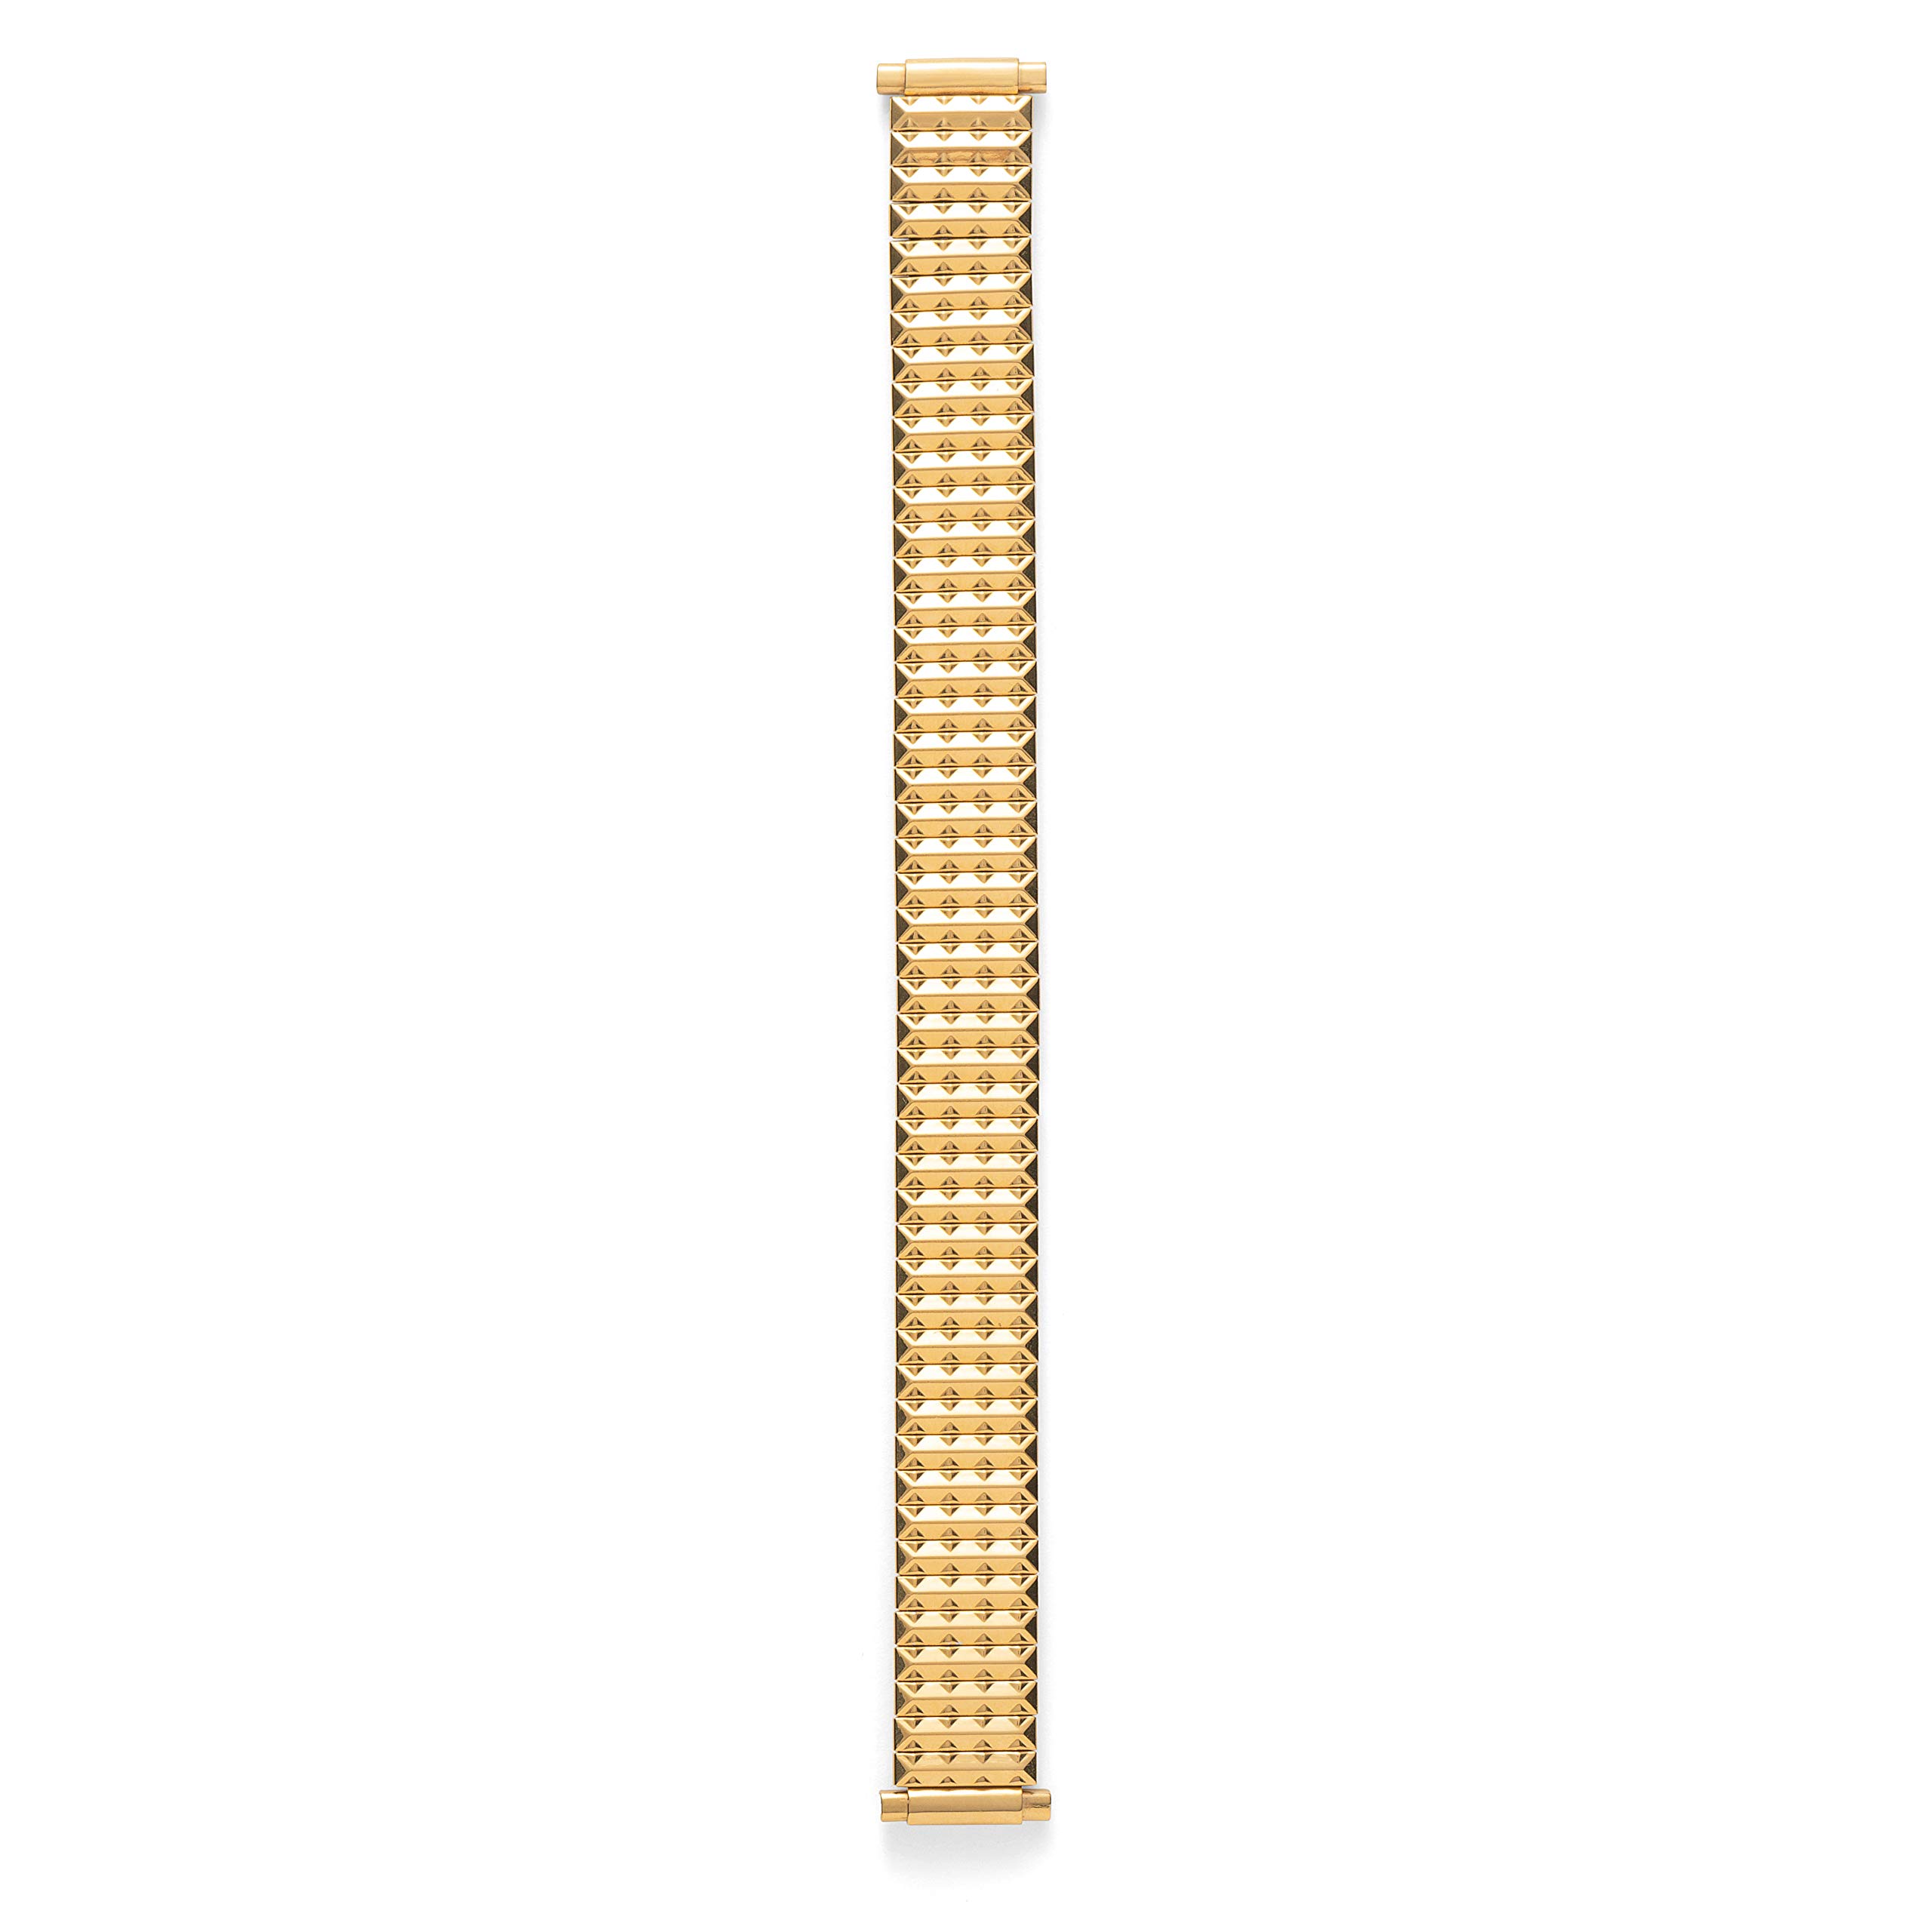 Speidel Ladies Twist-O-Flex Expansion Replacement Watch Band Gold Tone Straight End 10-14mm Extra Long